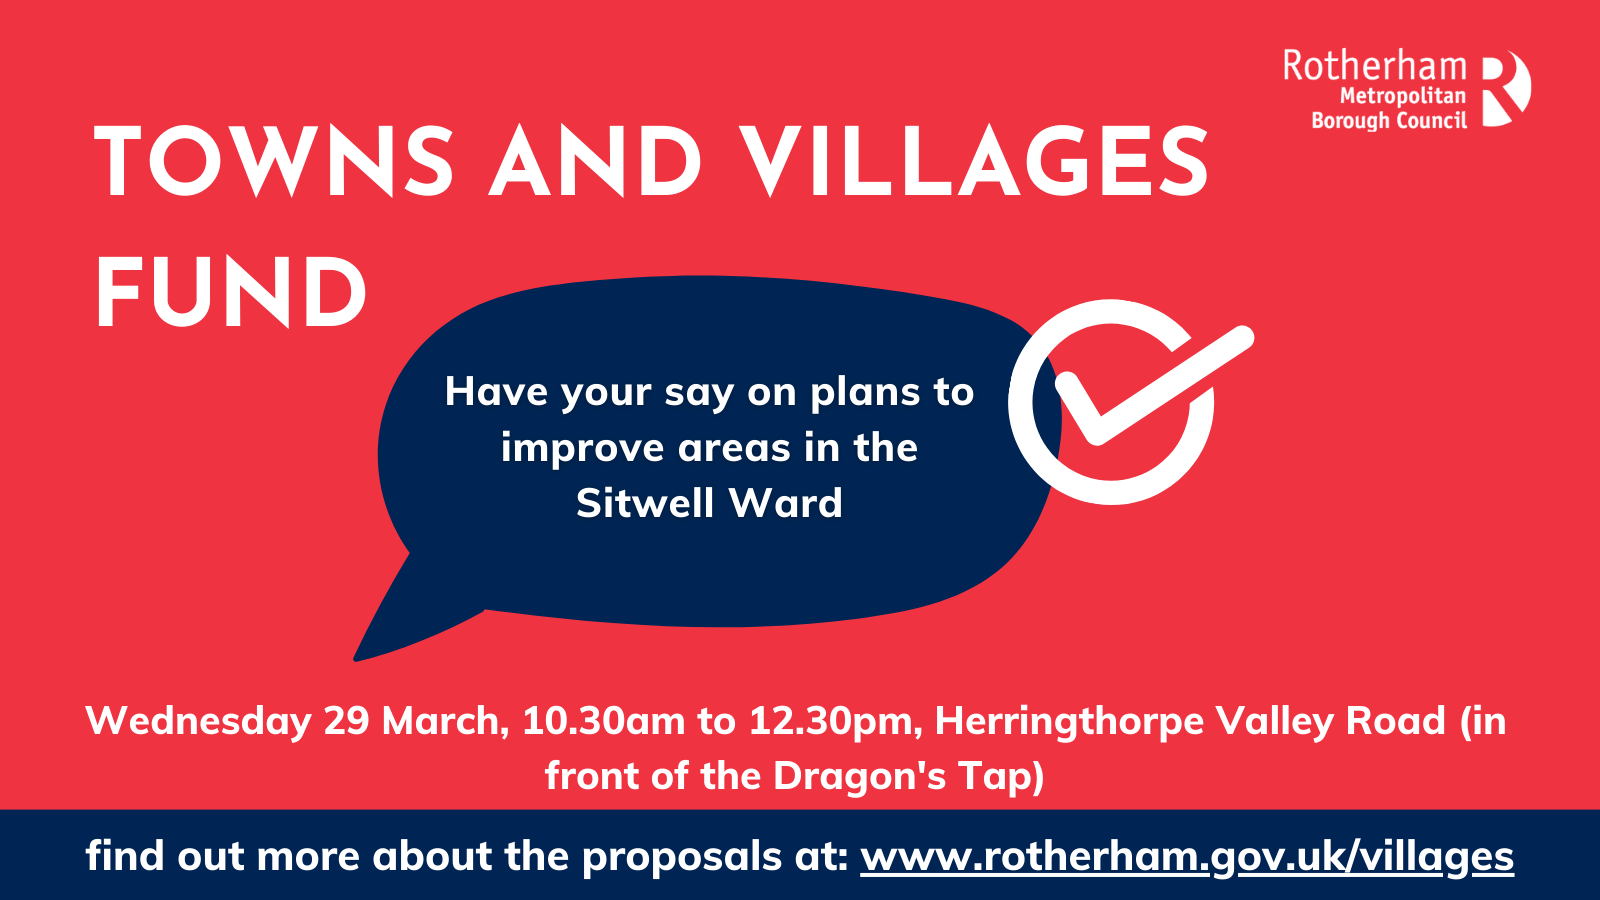 Have your say on plans to improve part of the Sitwell ward